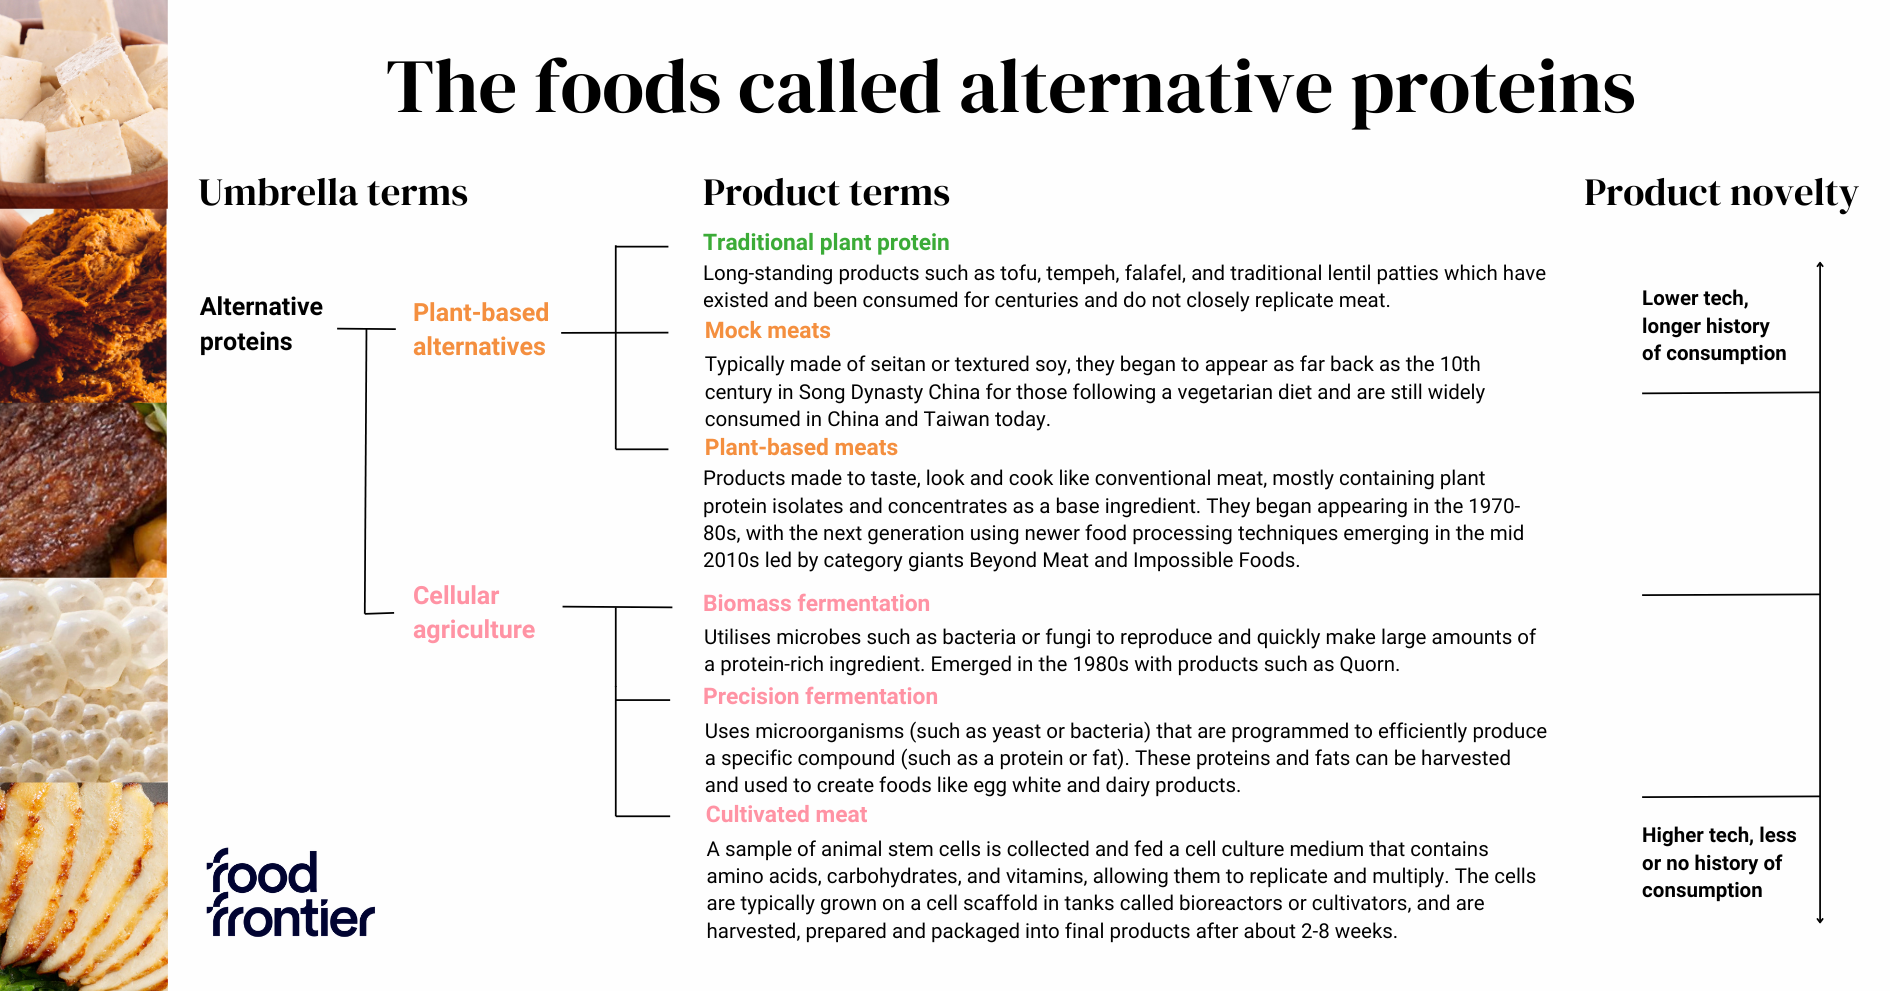 The foods called alternative proteins